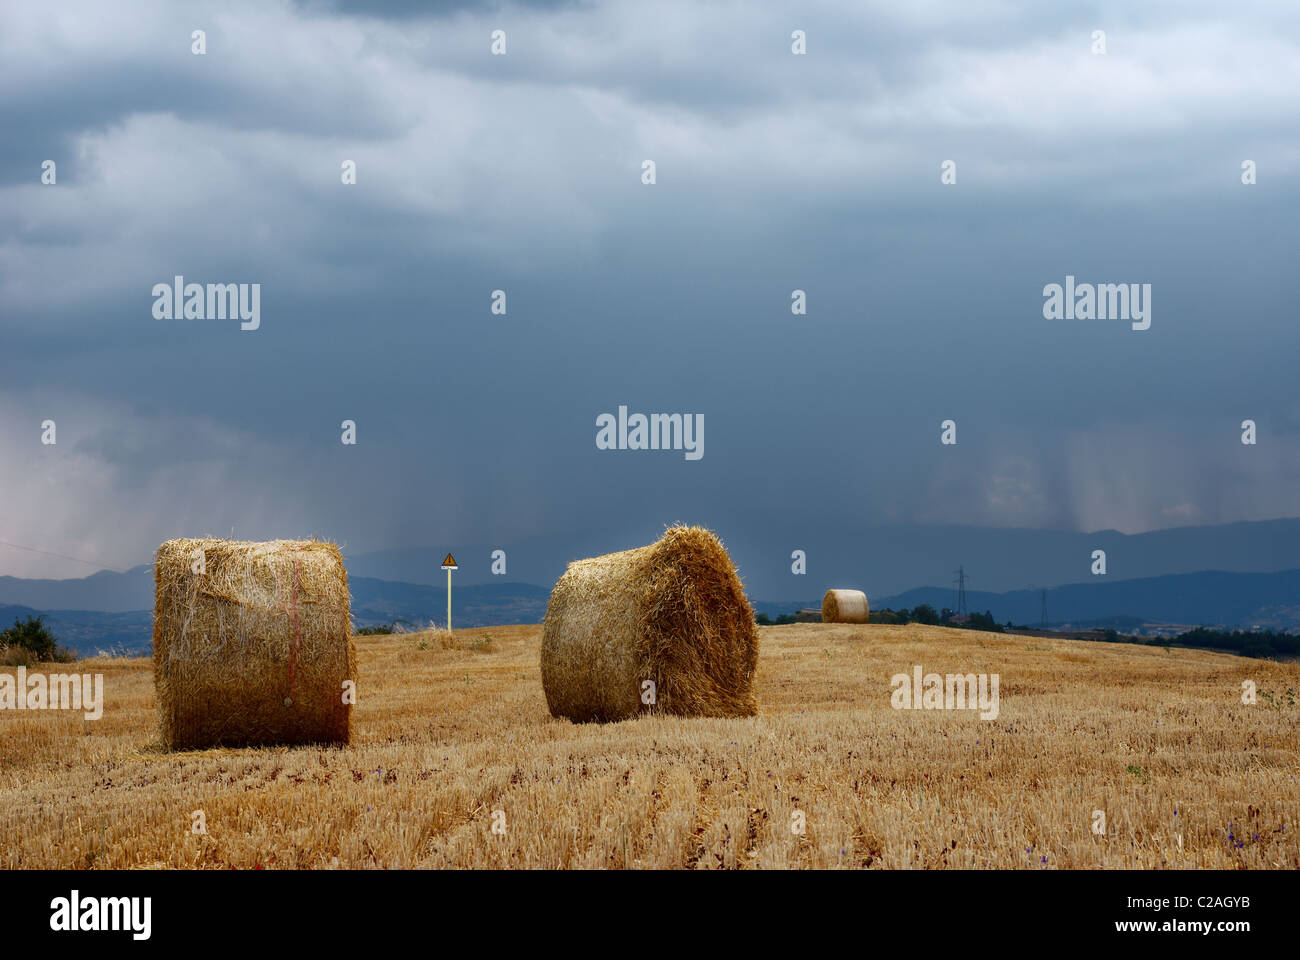 Straw bales in a field under moody sky Stock Photo